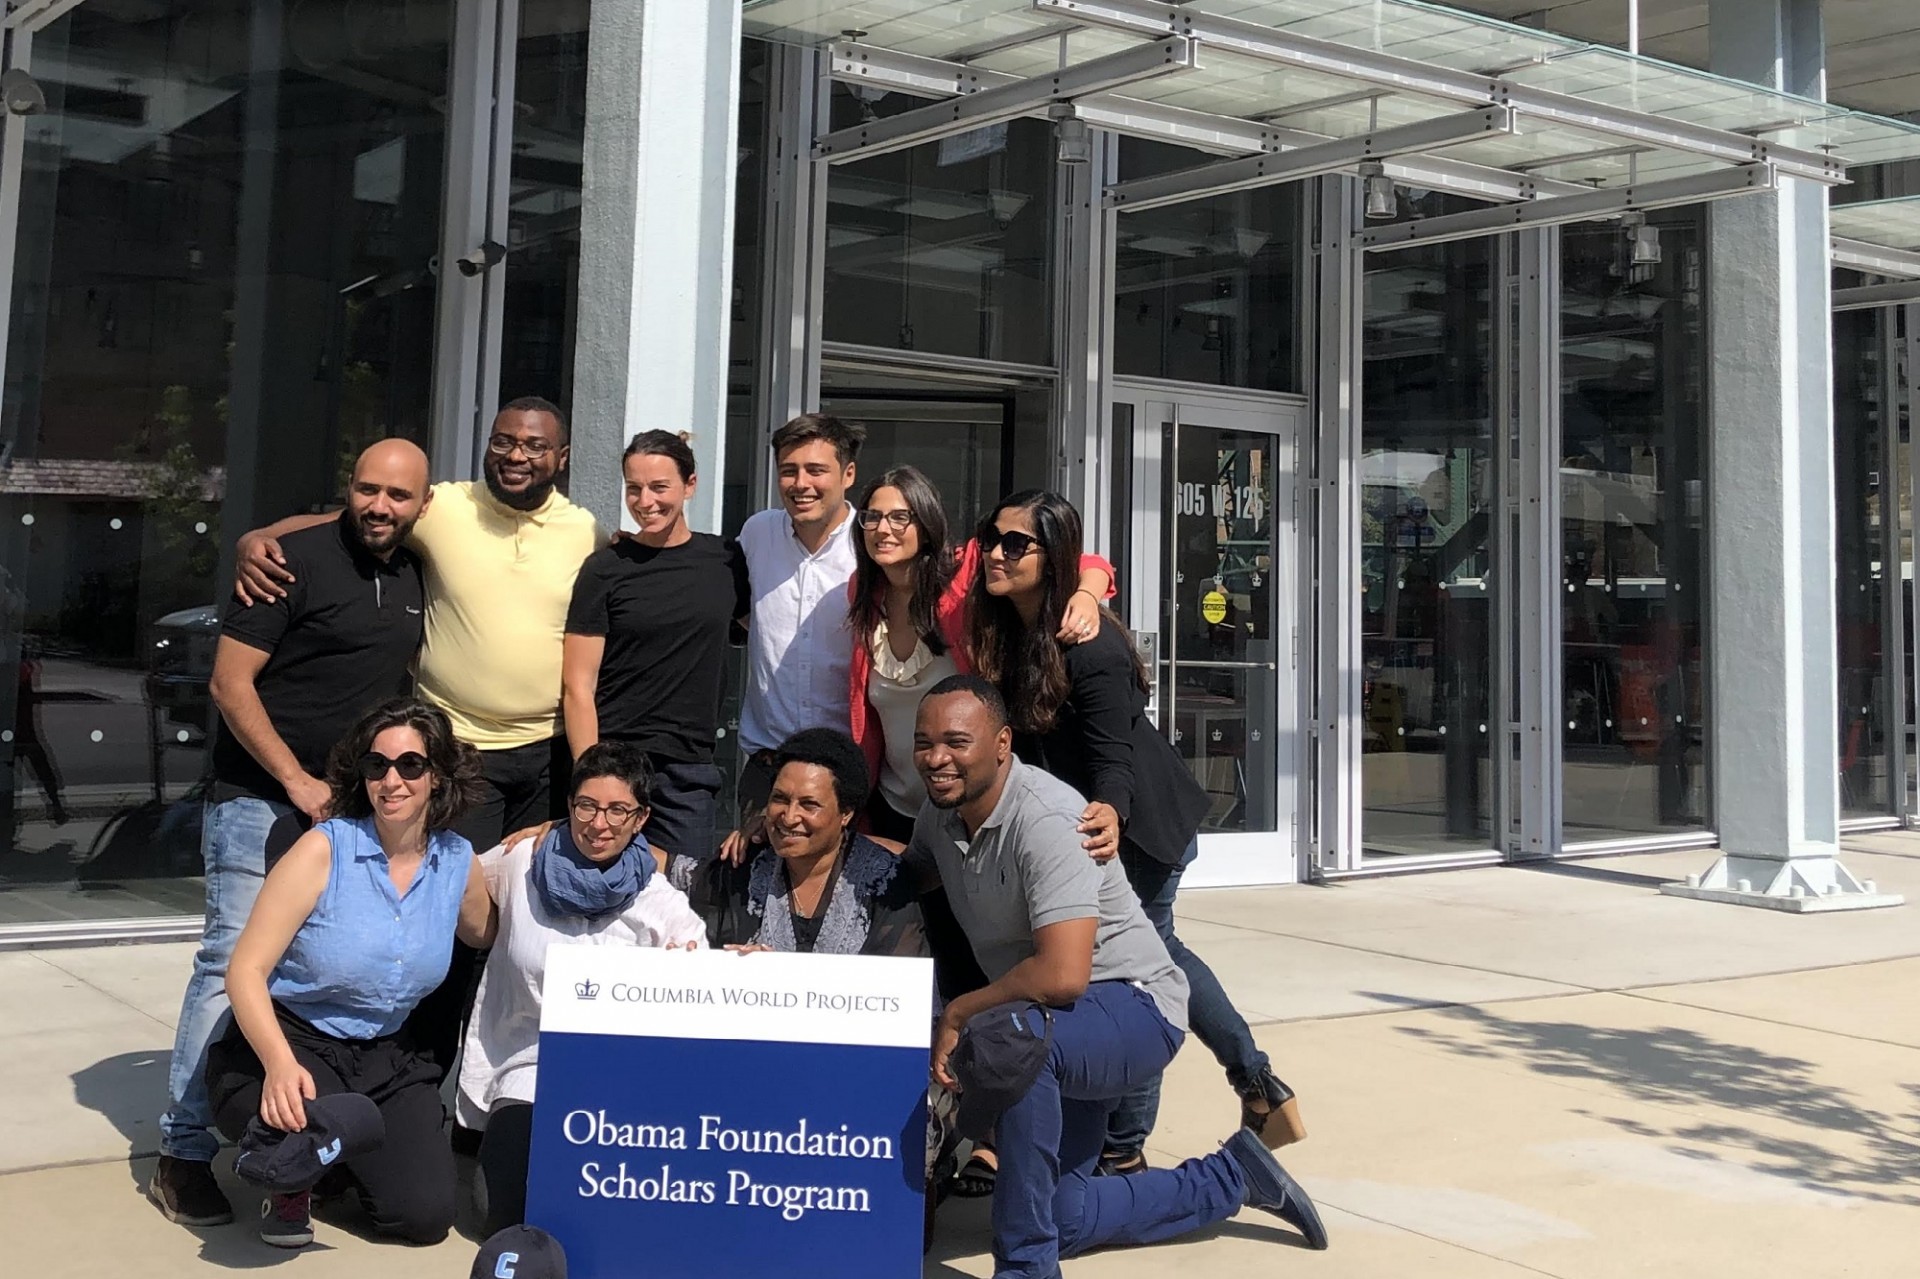 Obama Foundation Scholars pose in front of The Forum building